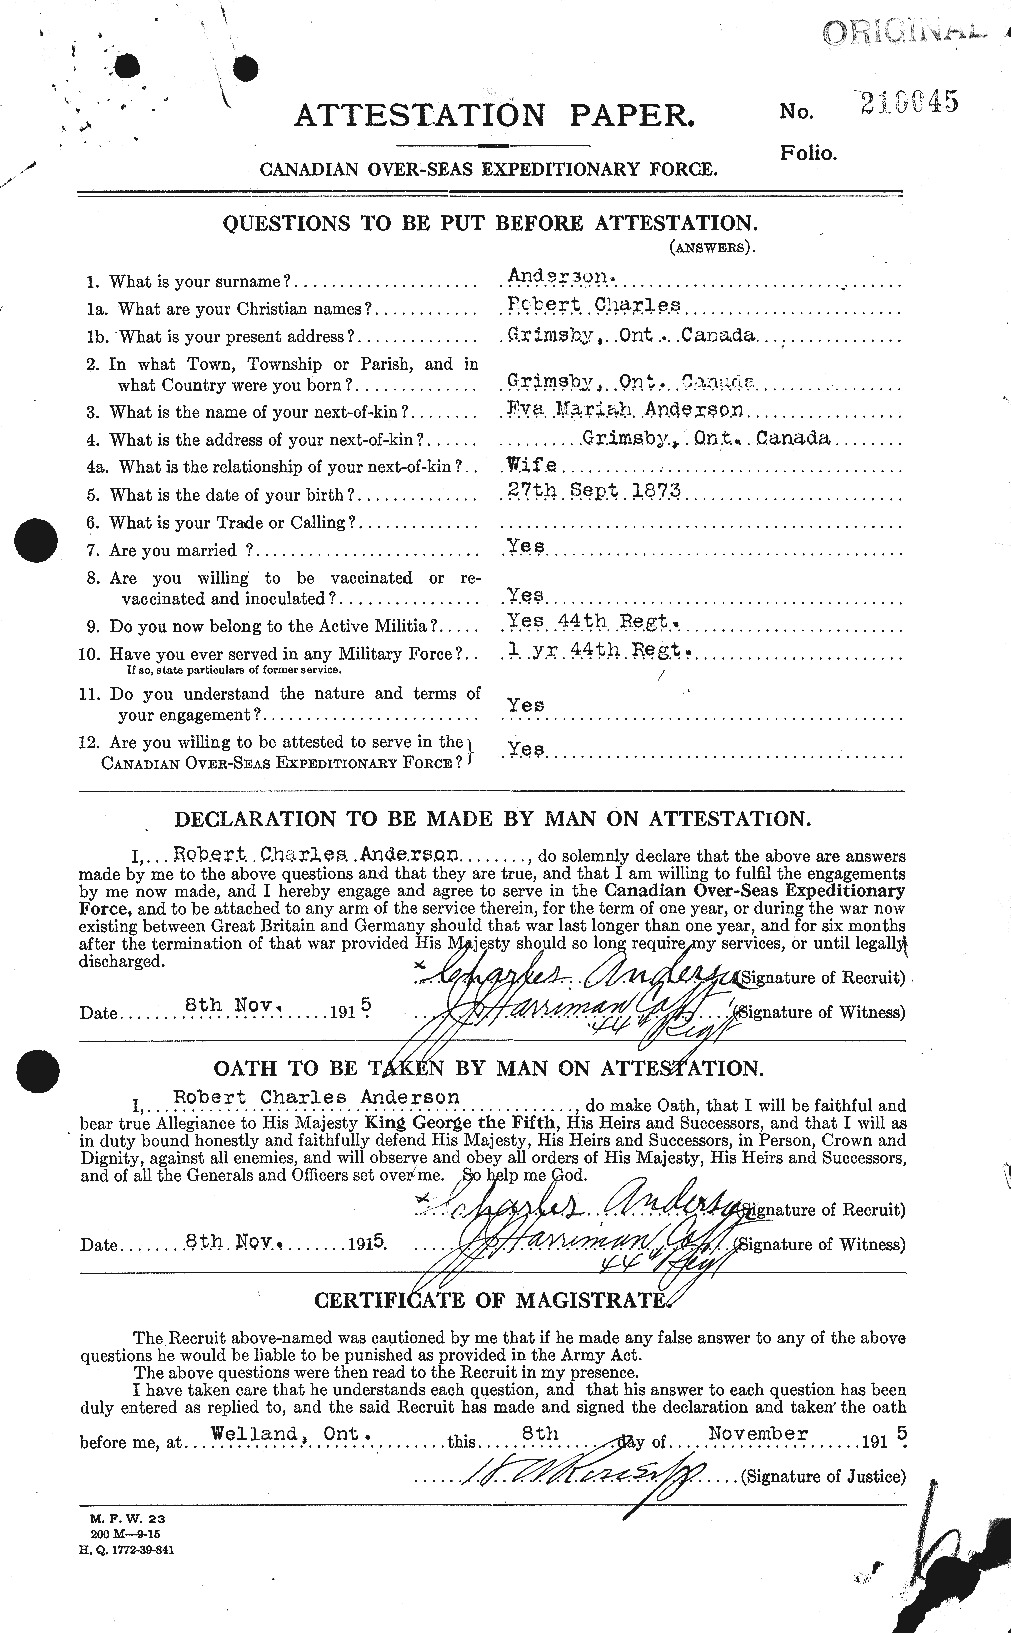 Personnel Records of the First World War - CEF 207264a